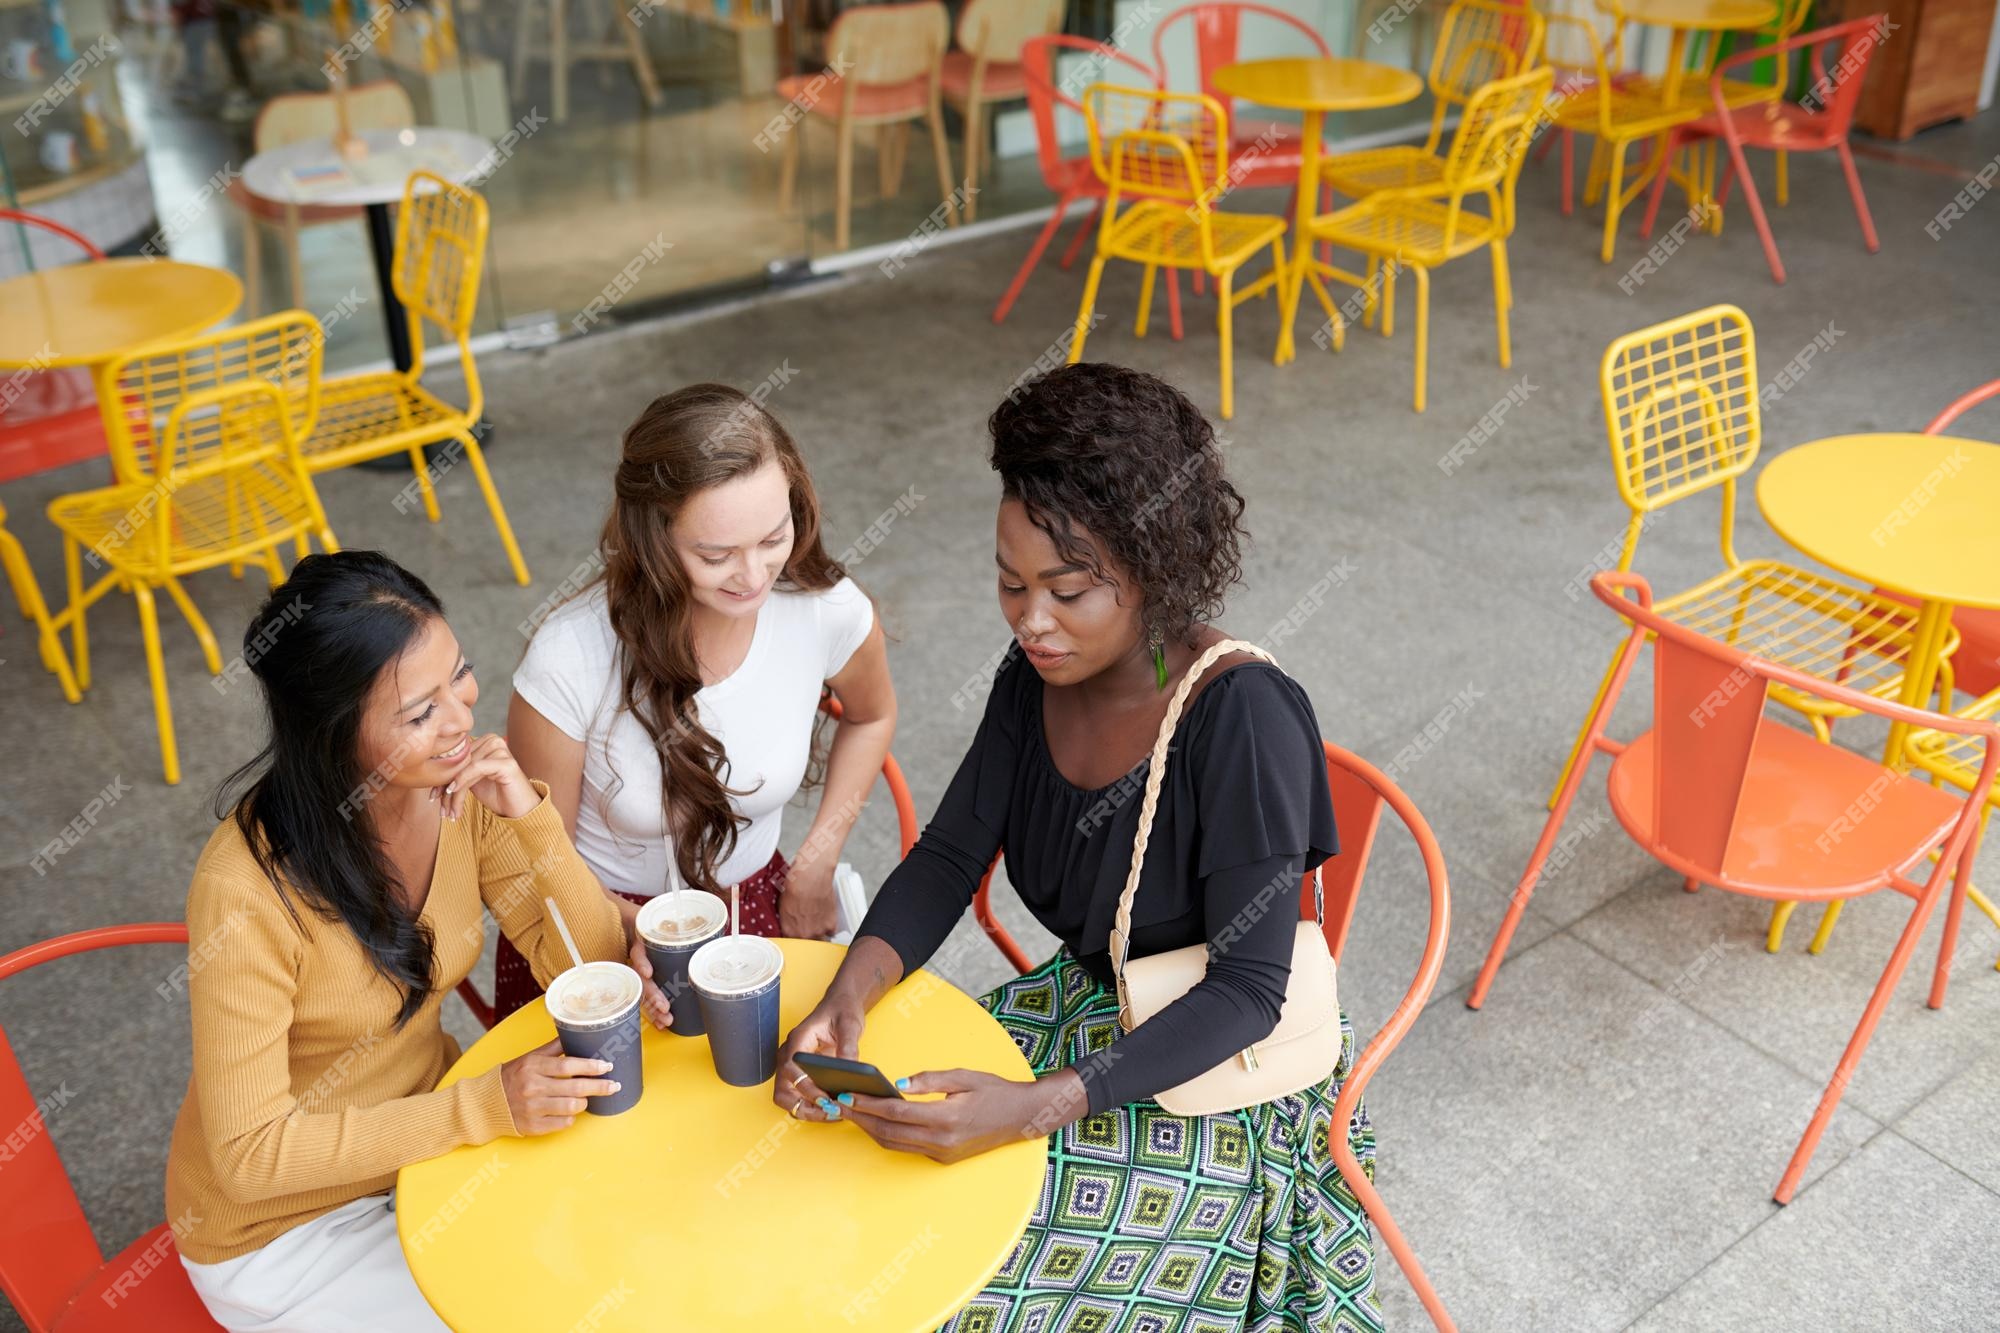 Premium Photo | Group of female friends sitting at cafe table drinking iced tea and discussing news and trends